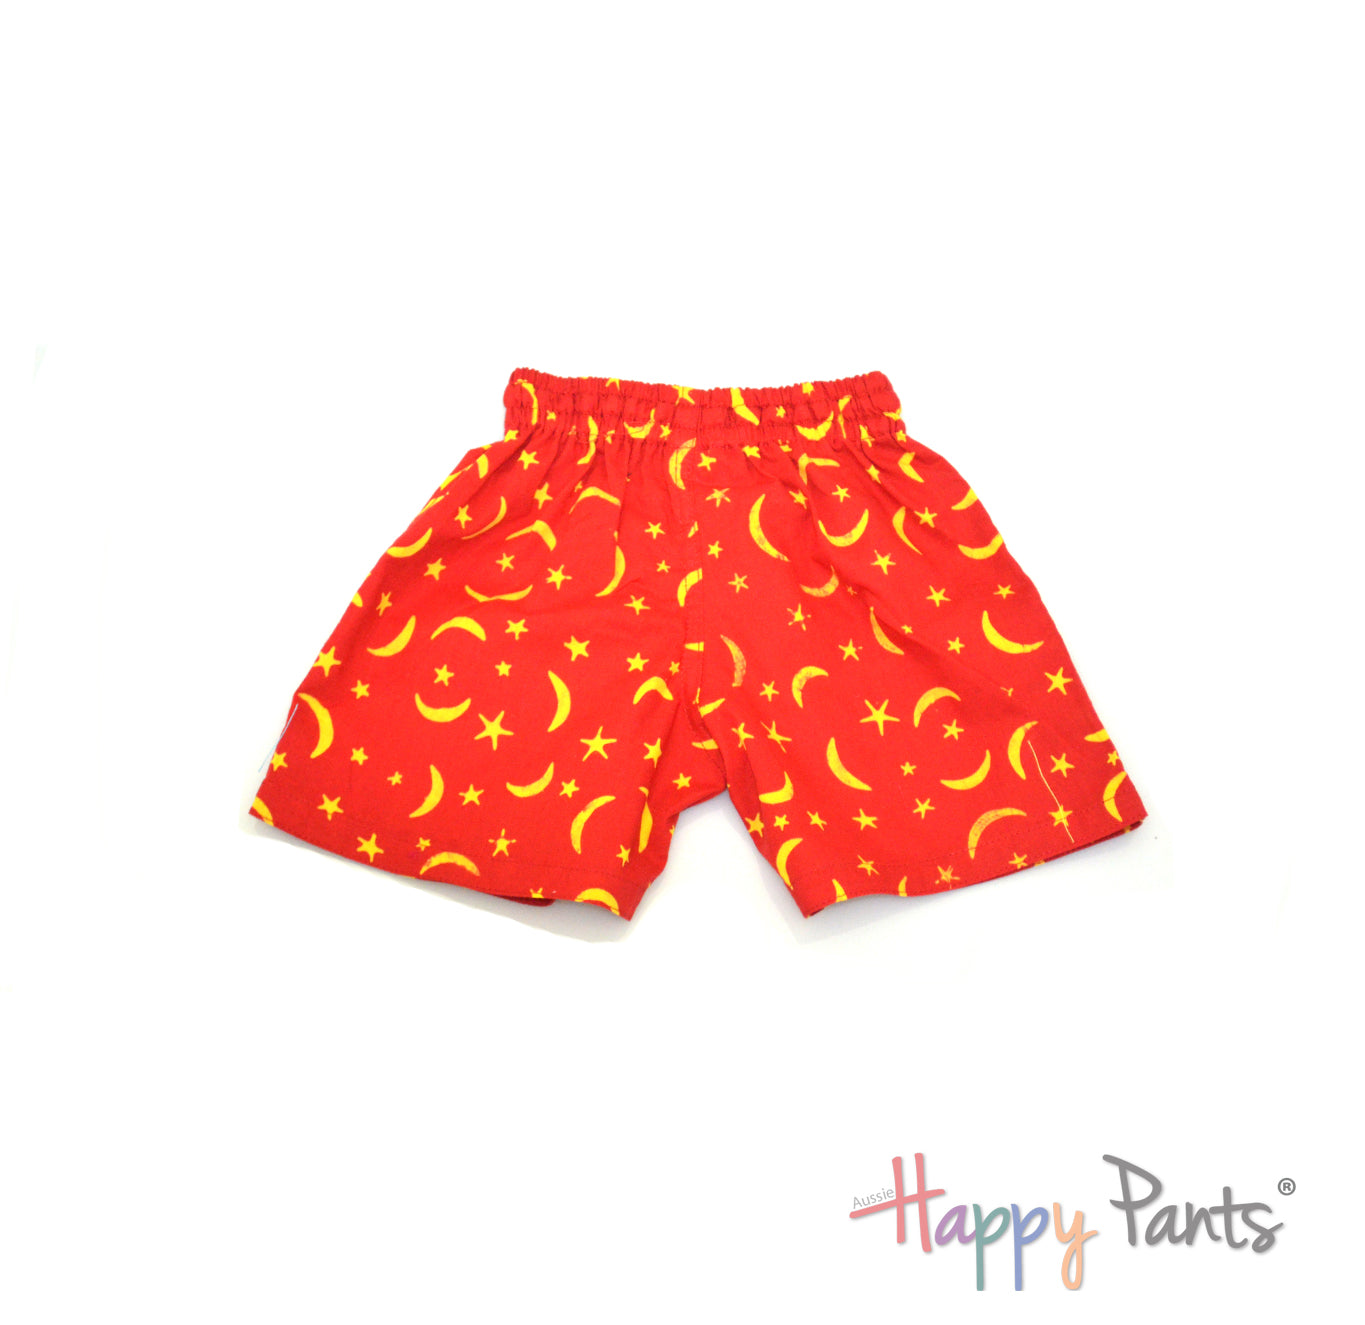 Red Dragon's Breath Shorts for Boys